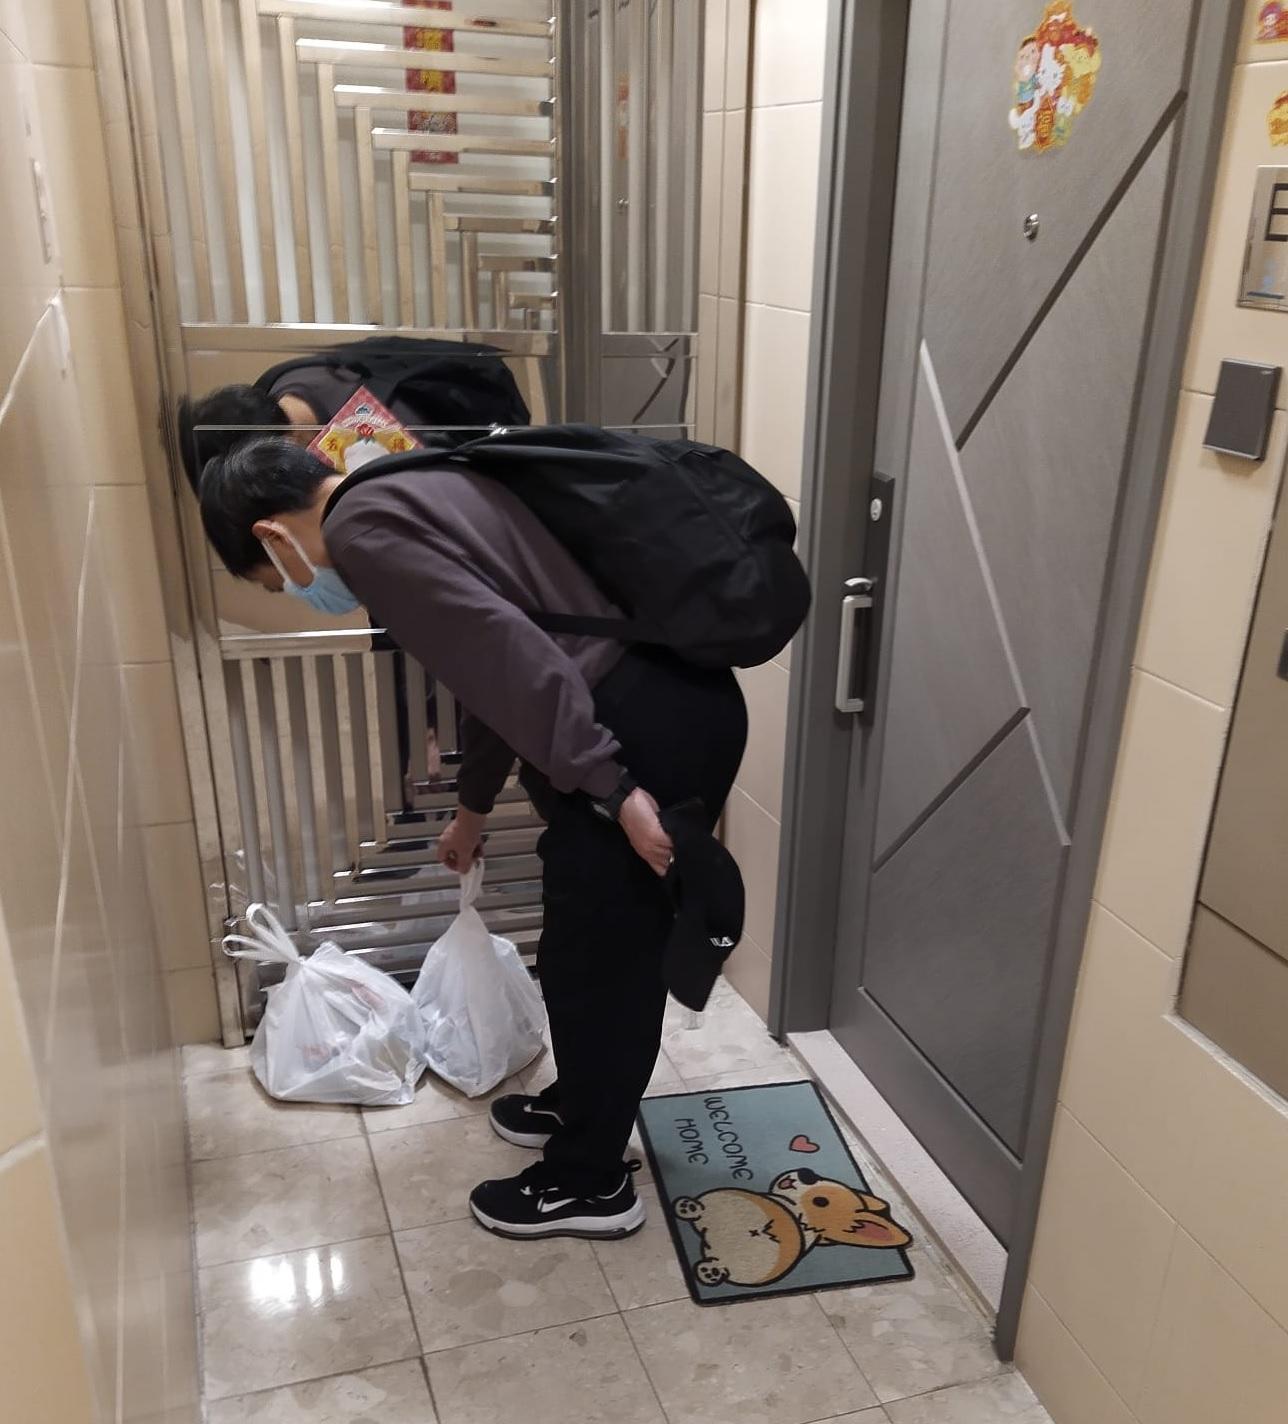 The Home Affairs Department civil service team delivered basic necessities and food to the persons pending admission in Wong Tai Sin, Yau Tsim Mong, Kowloon City and the Southern Districts on March 12.